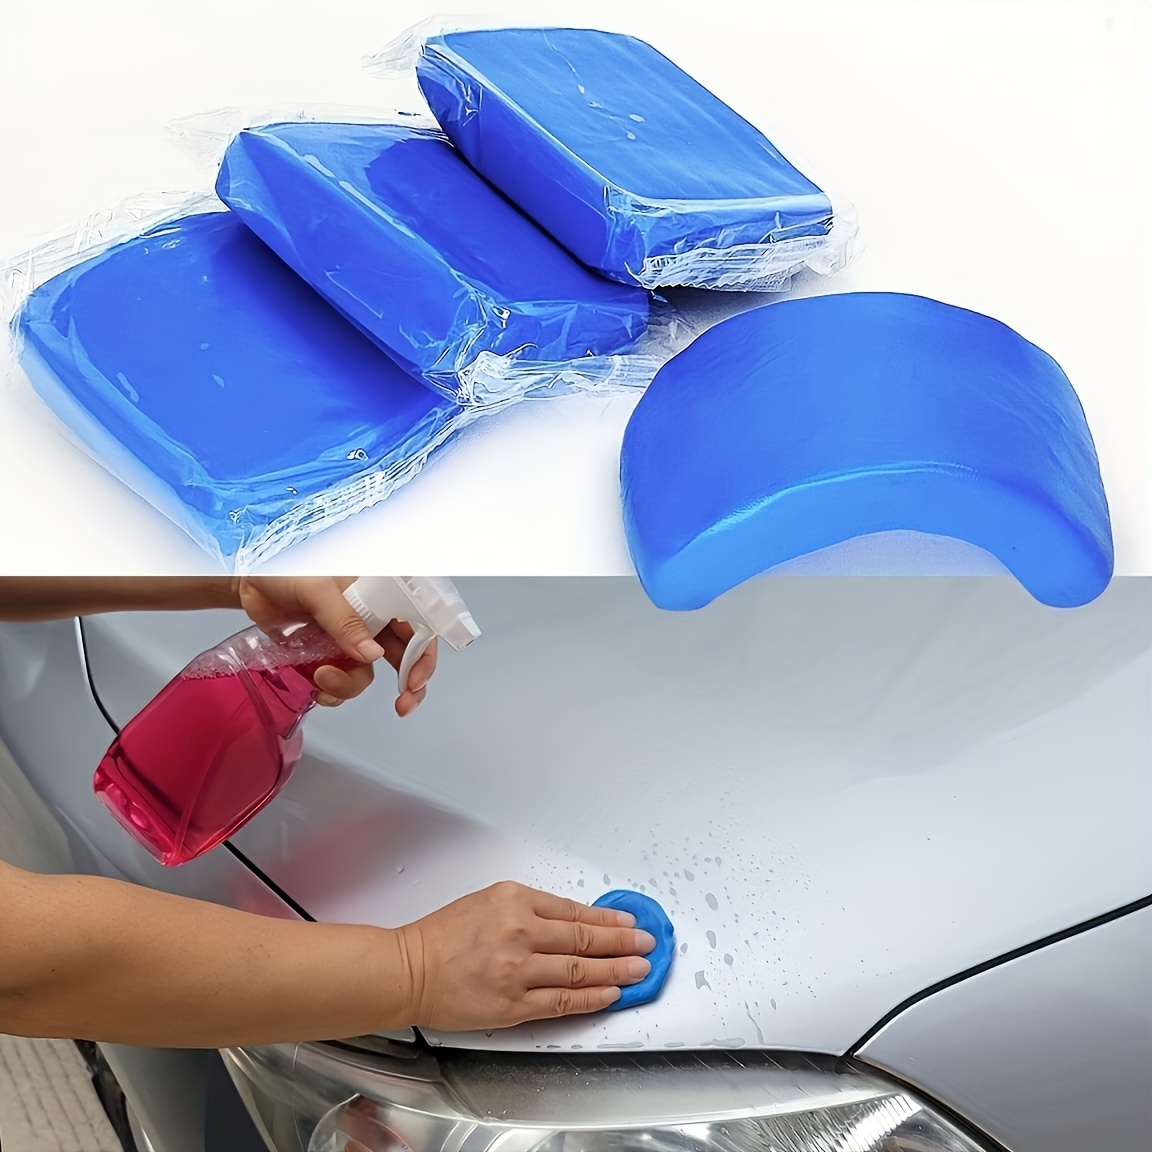 180g Magic Cleaning Clay Bars Car Auto Remove Detailing Wash Cleaner Blue  Mud Auto Care Car Wash Tool Decontamination Ability